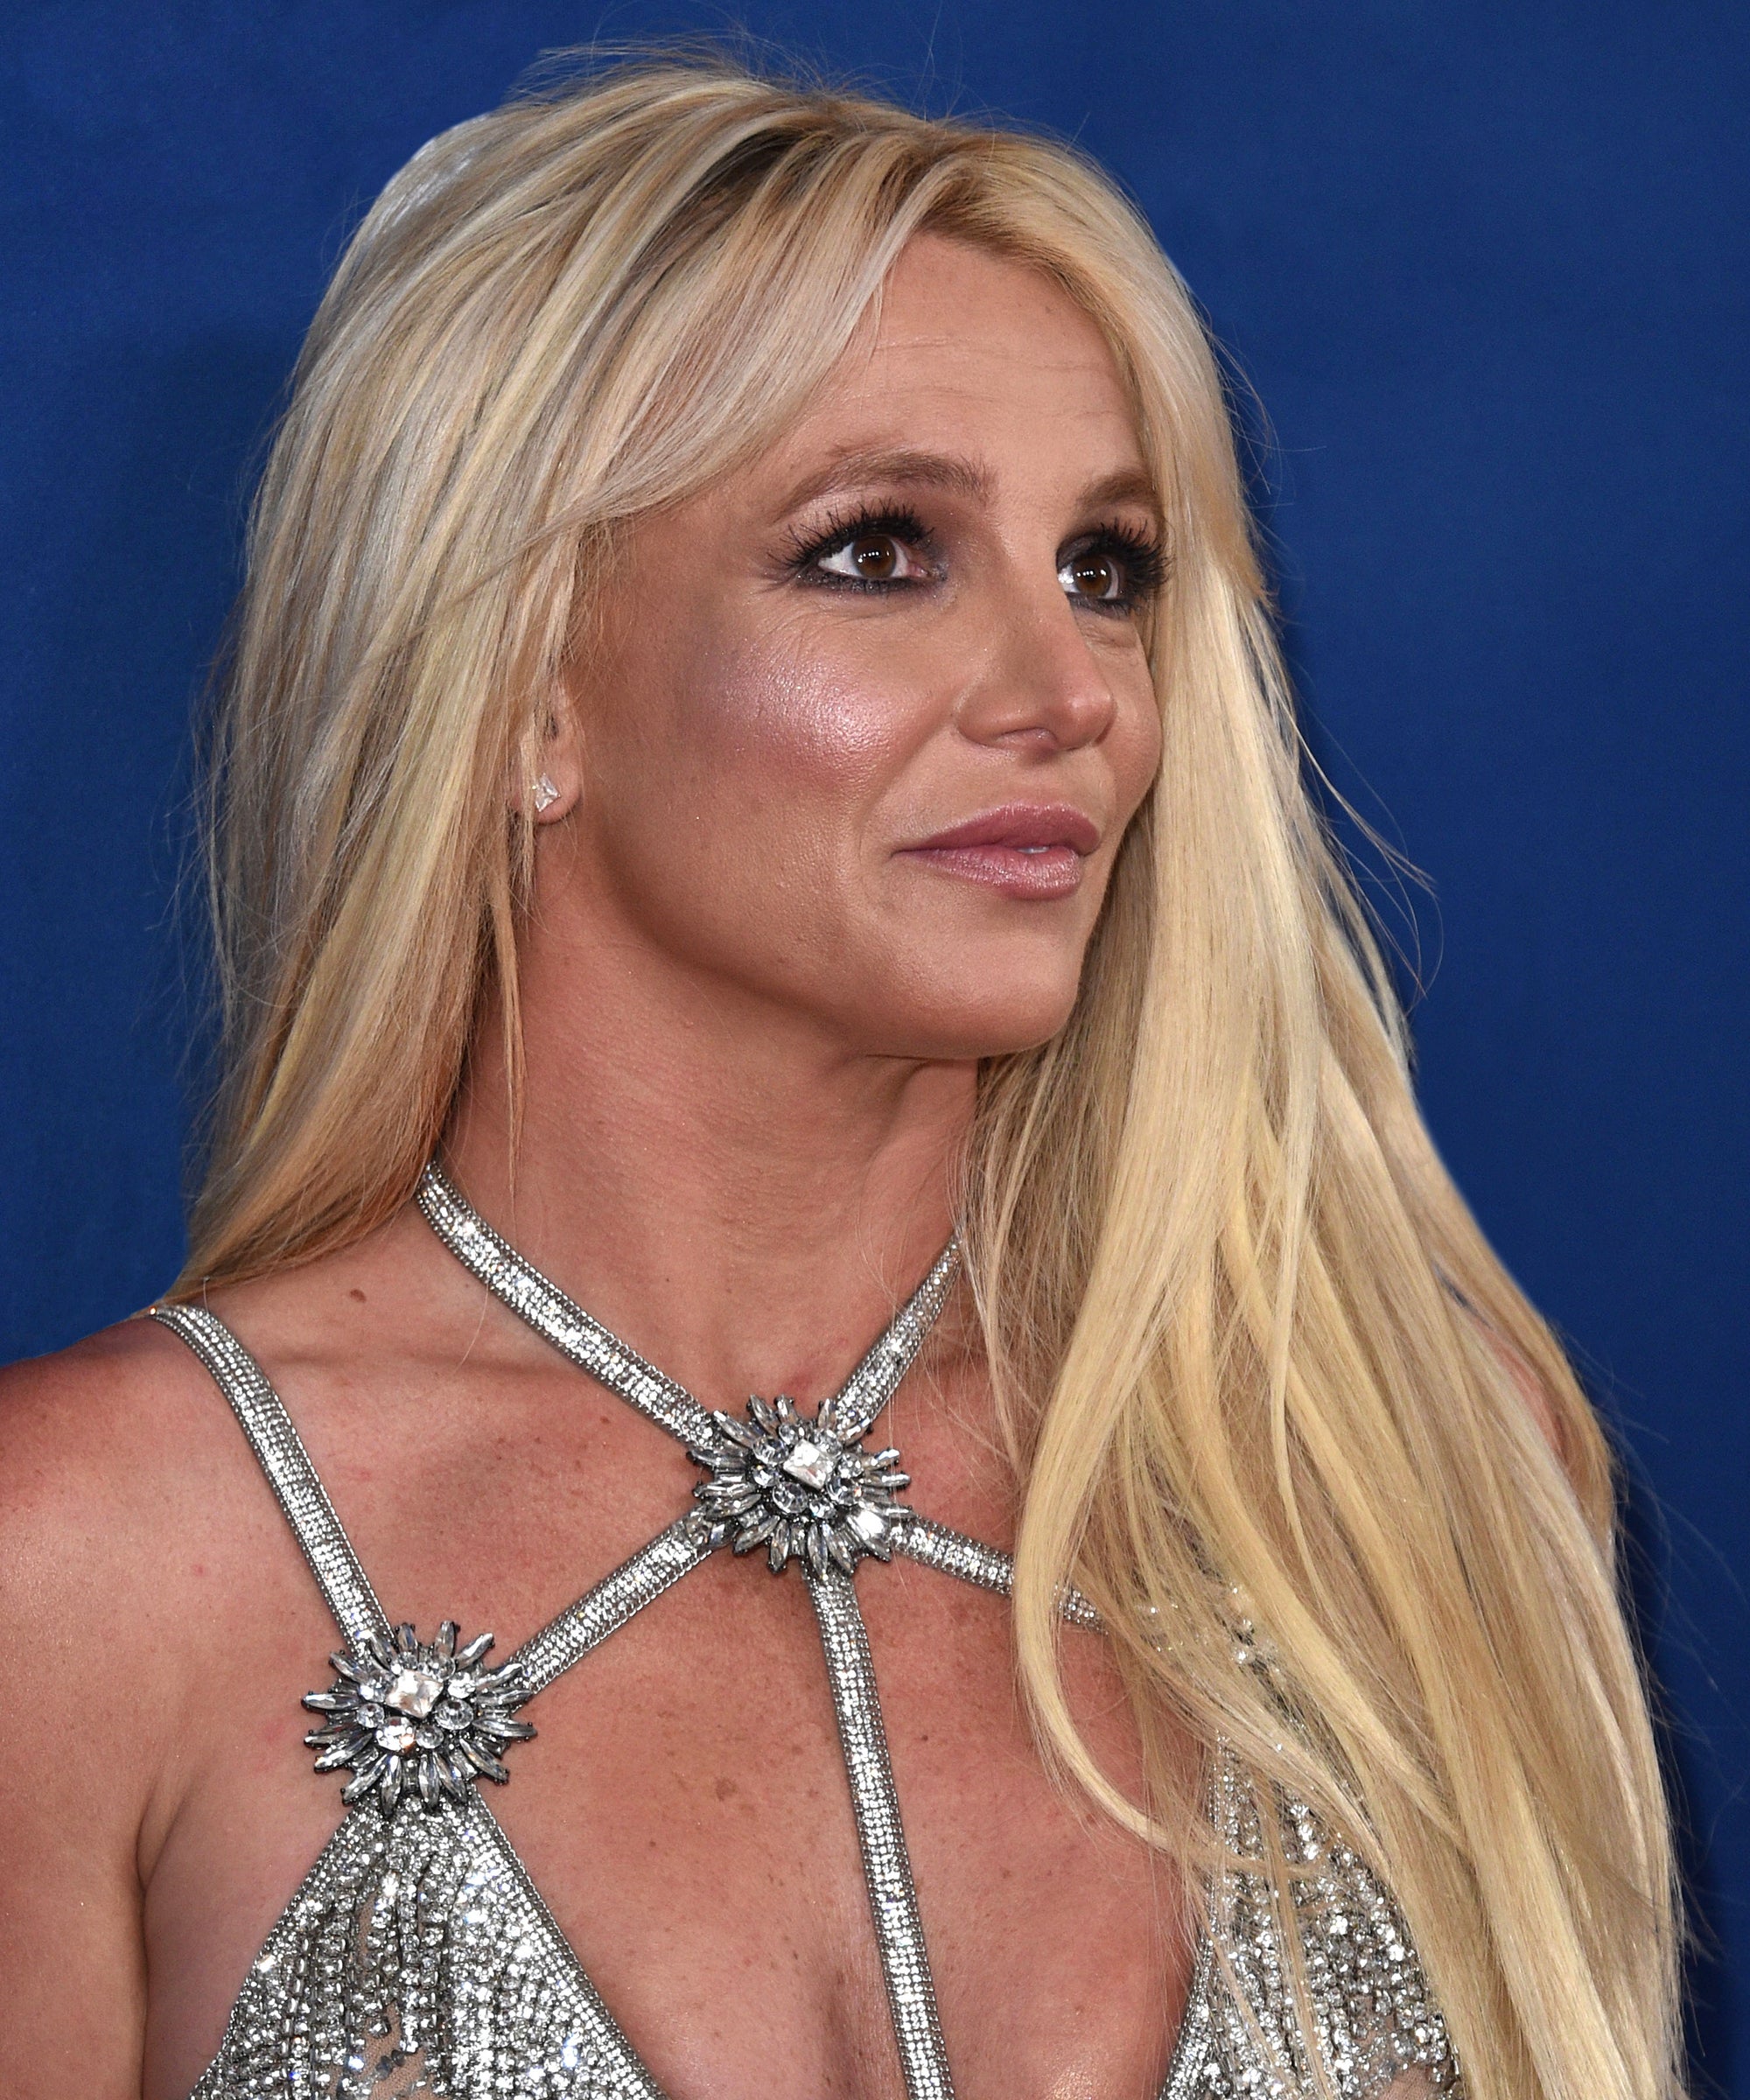 Britney Spears Conservatorship Hearing Meaning